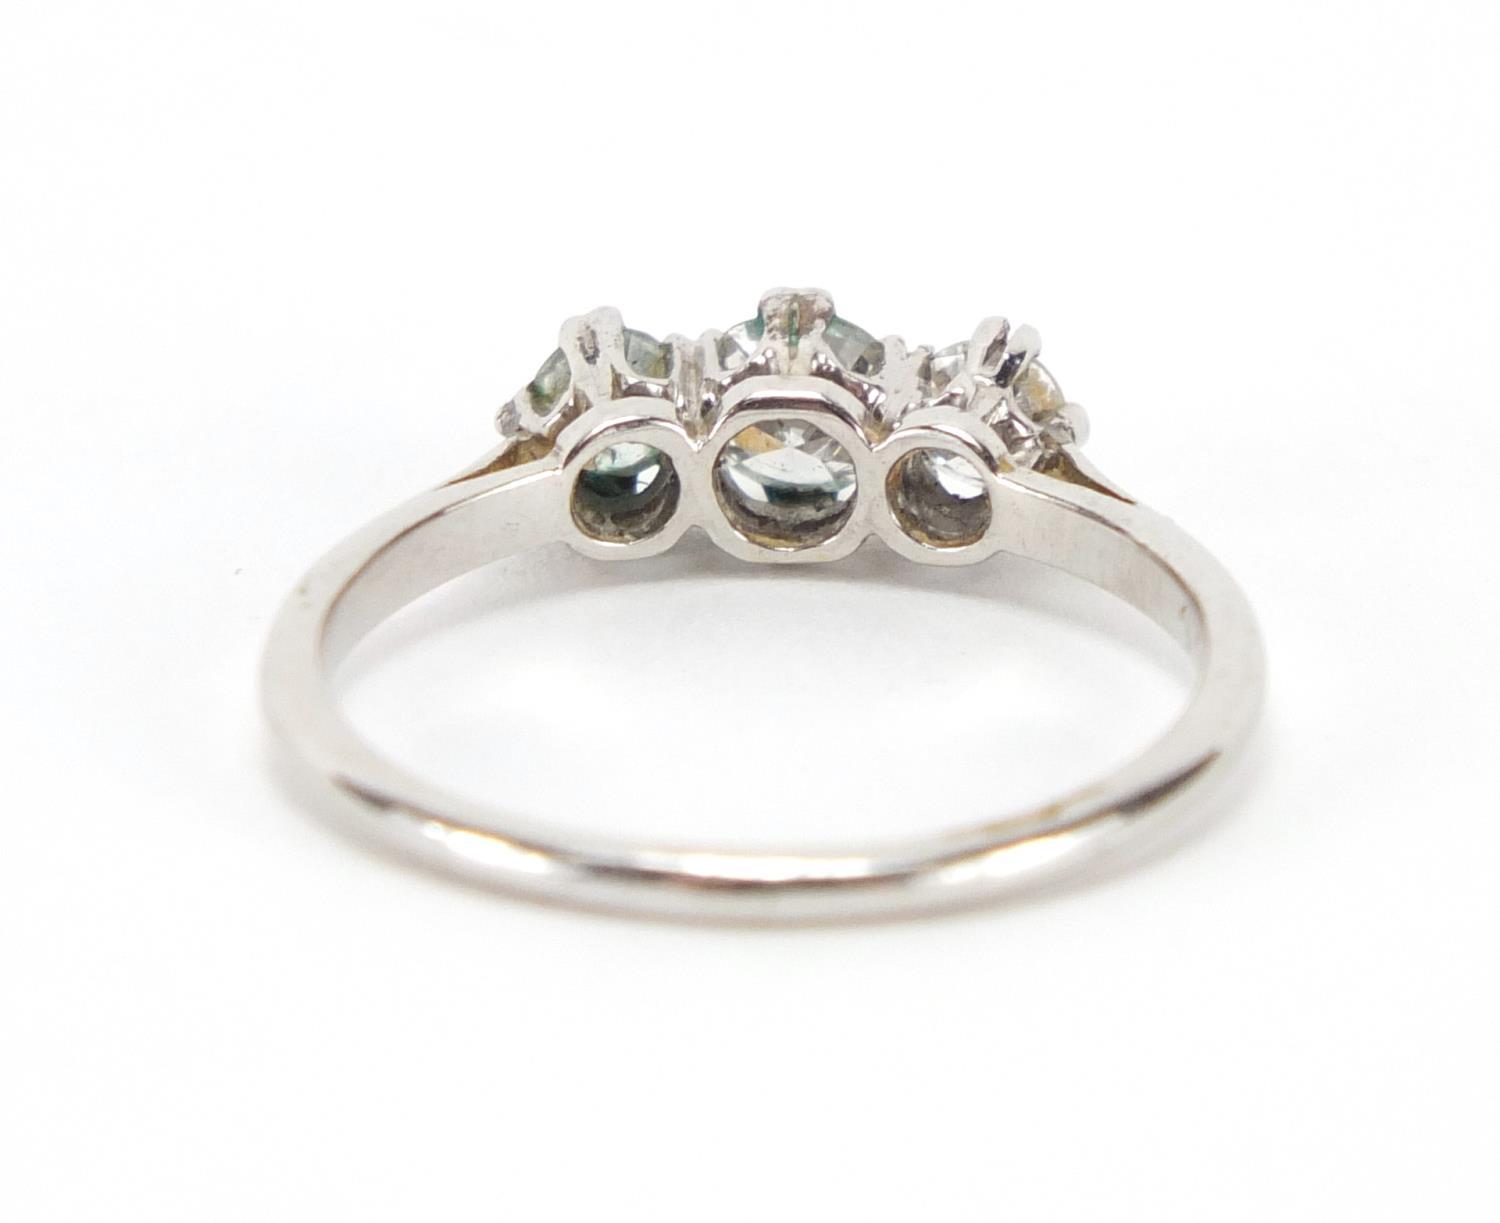 Platinum diamond three stone ring, size L, approximate weight 2.5g : For Extra Condition Reports - Image 5 of 8